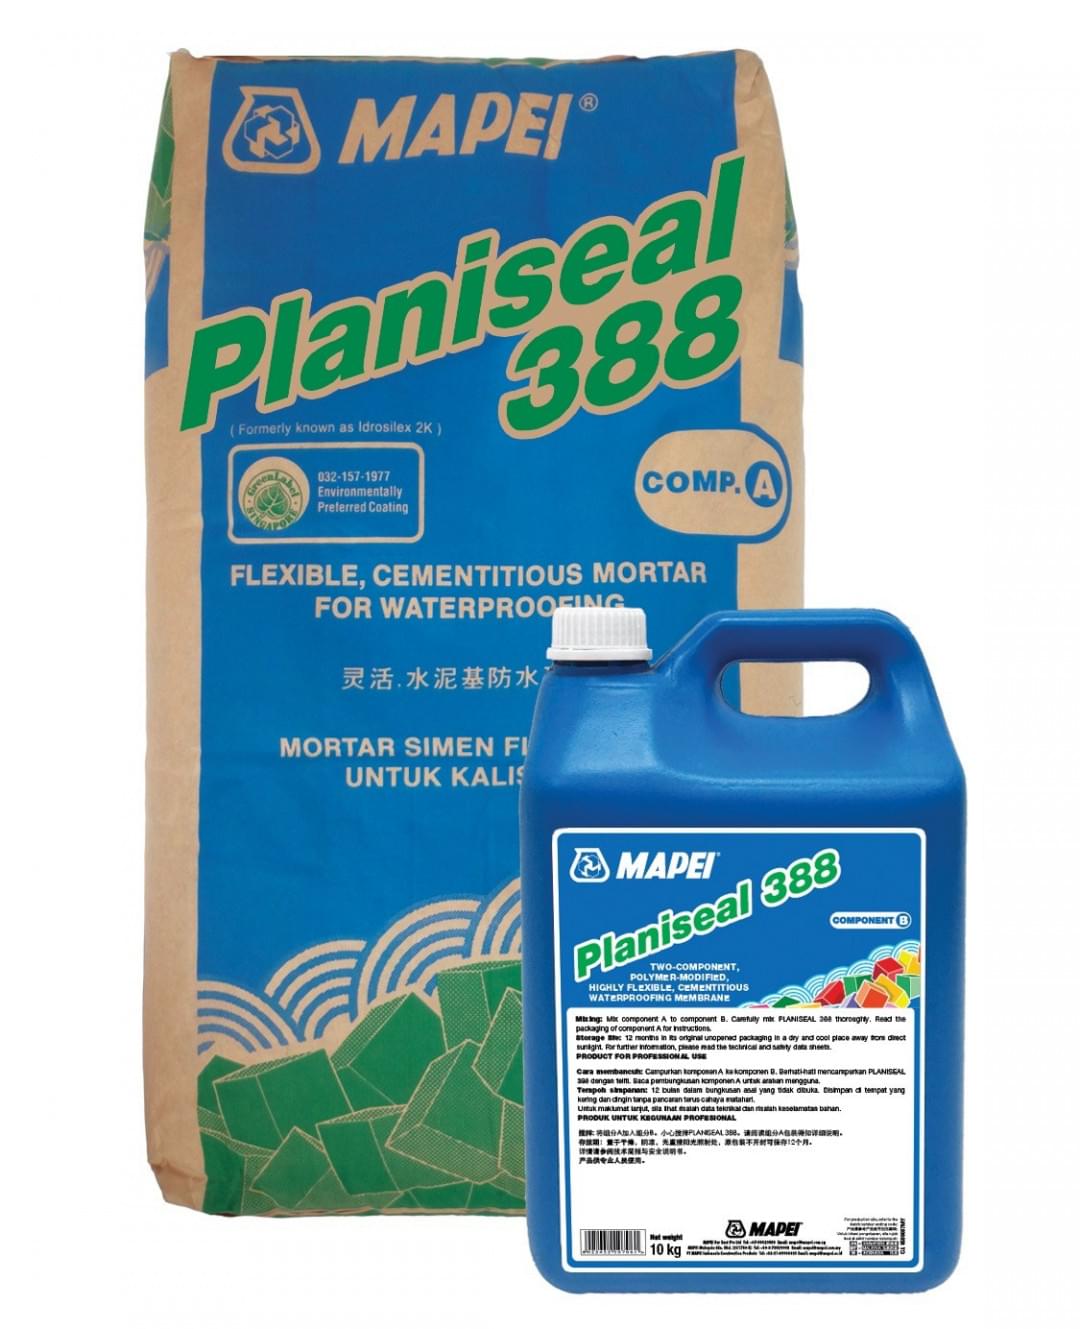 PLANISEAL 388 from MAPEI